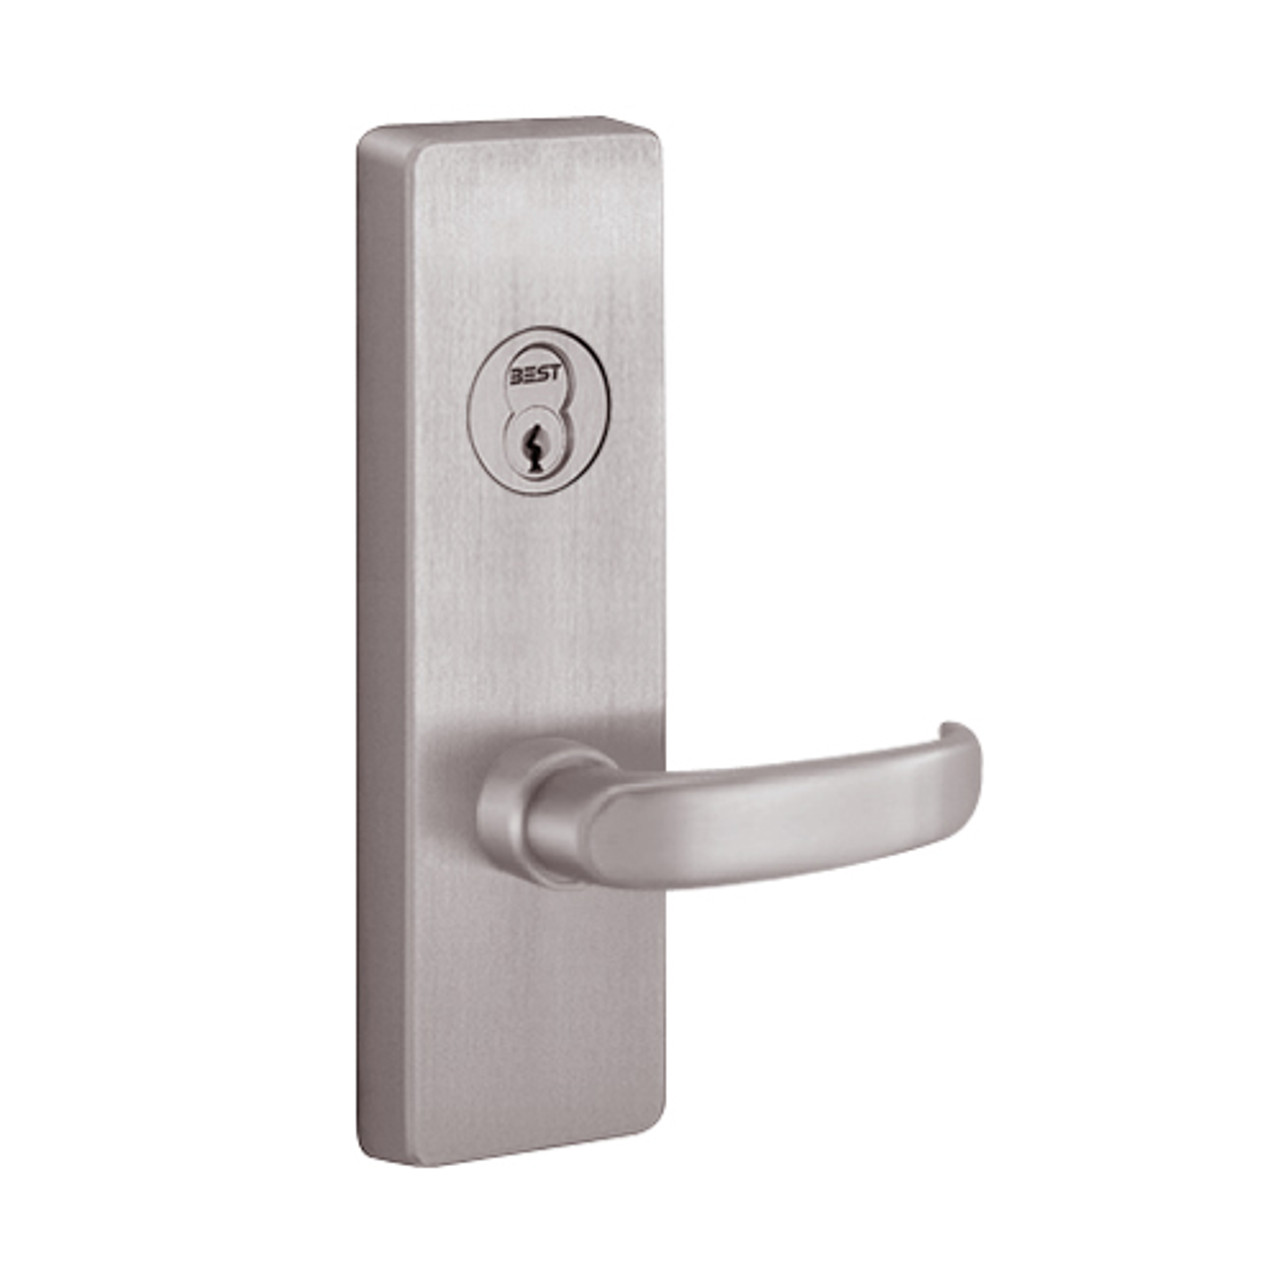 RVM4908D-630-RHR PHI Key Controls Lever Vandal Resistant Retrofit Trim with D Lever Design for Apex and Olympian Series Exit Device in Satin Stainless Steel Finish